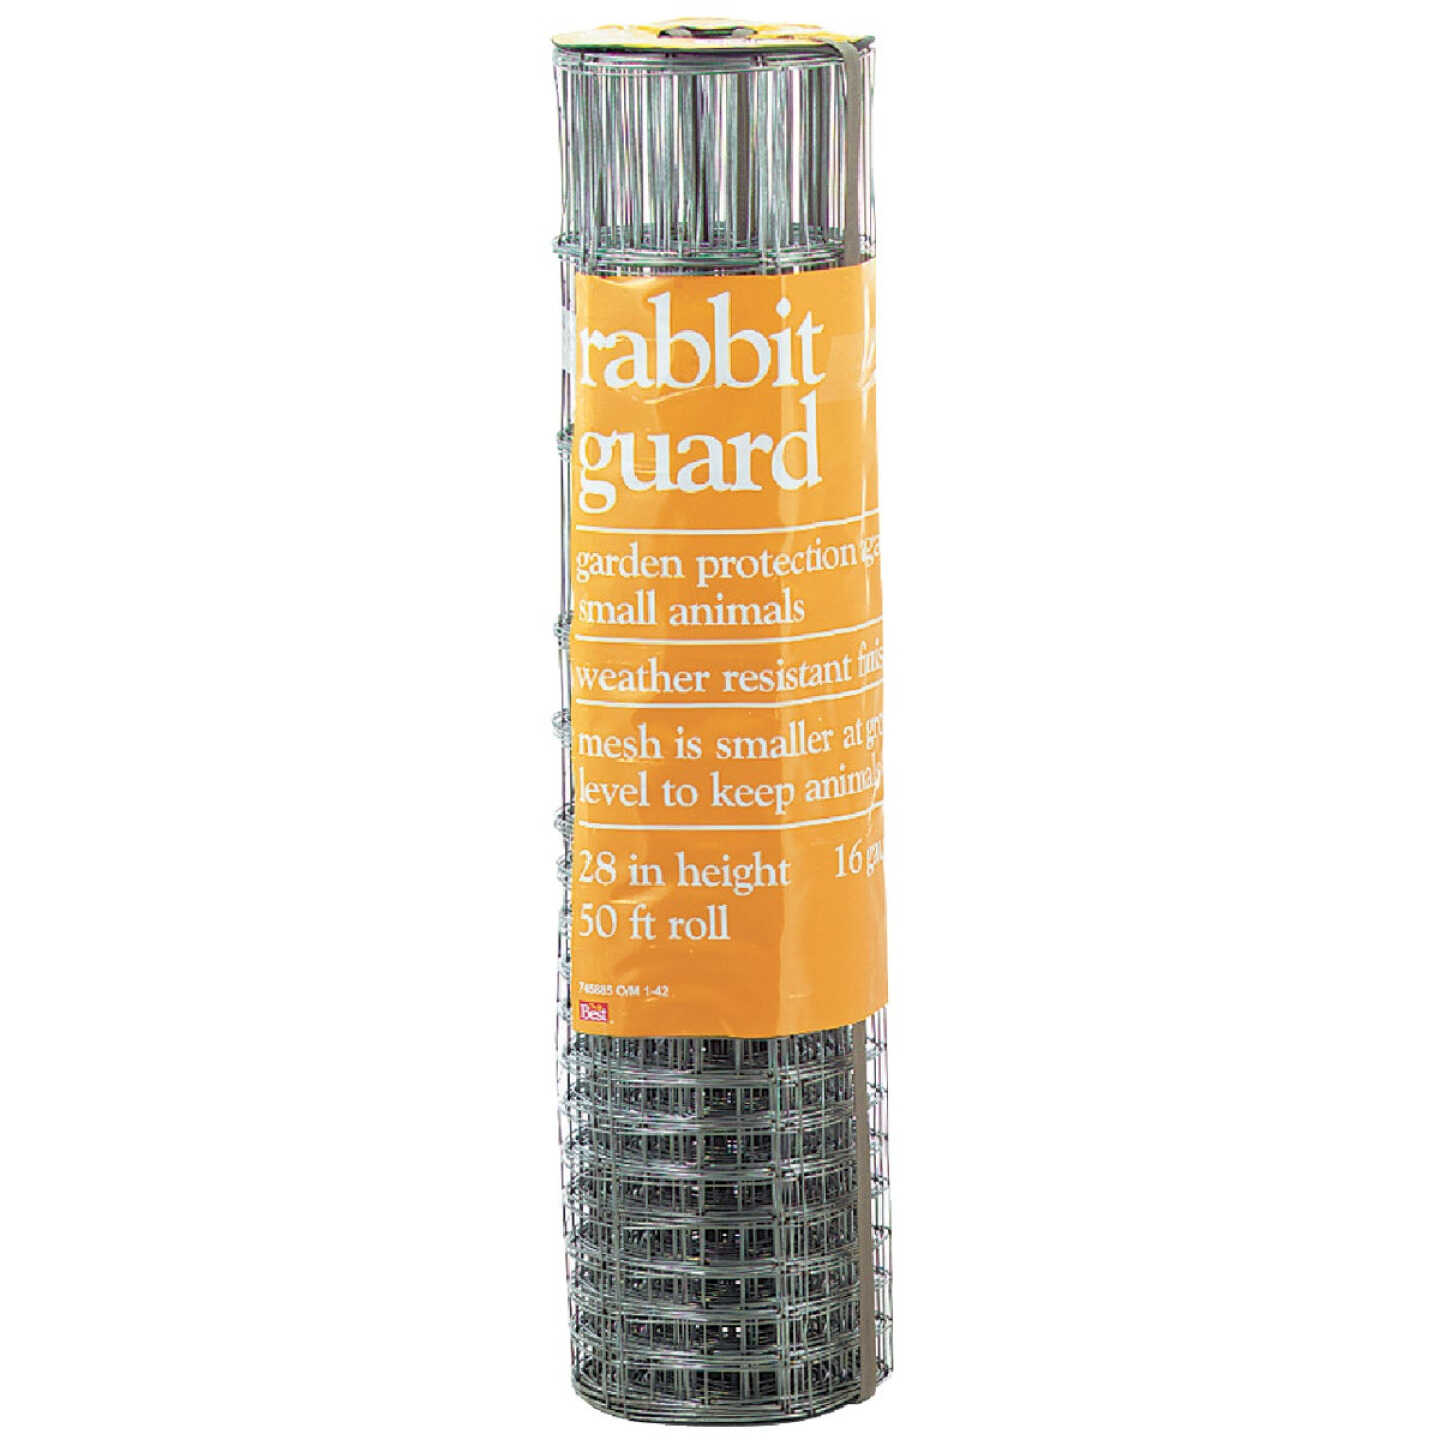 Rabbit Guard 40 In. H. x 50 Ft. L. Galvanized Wire Garden Fence, Silver Image 2